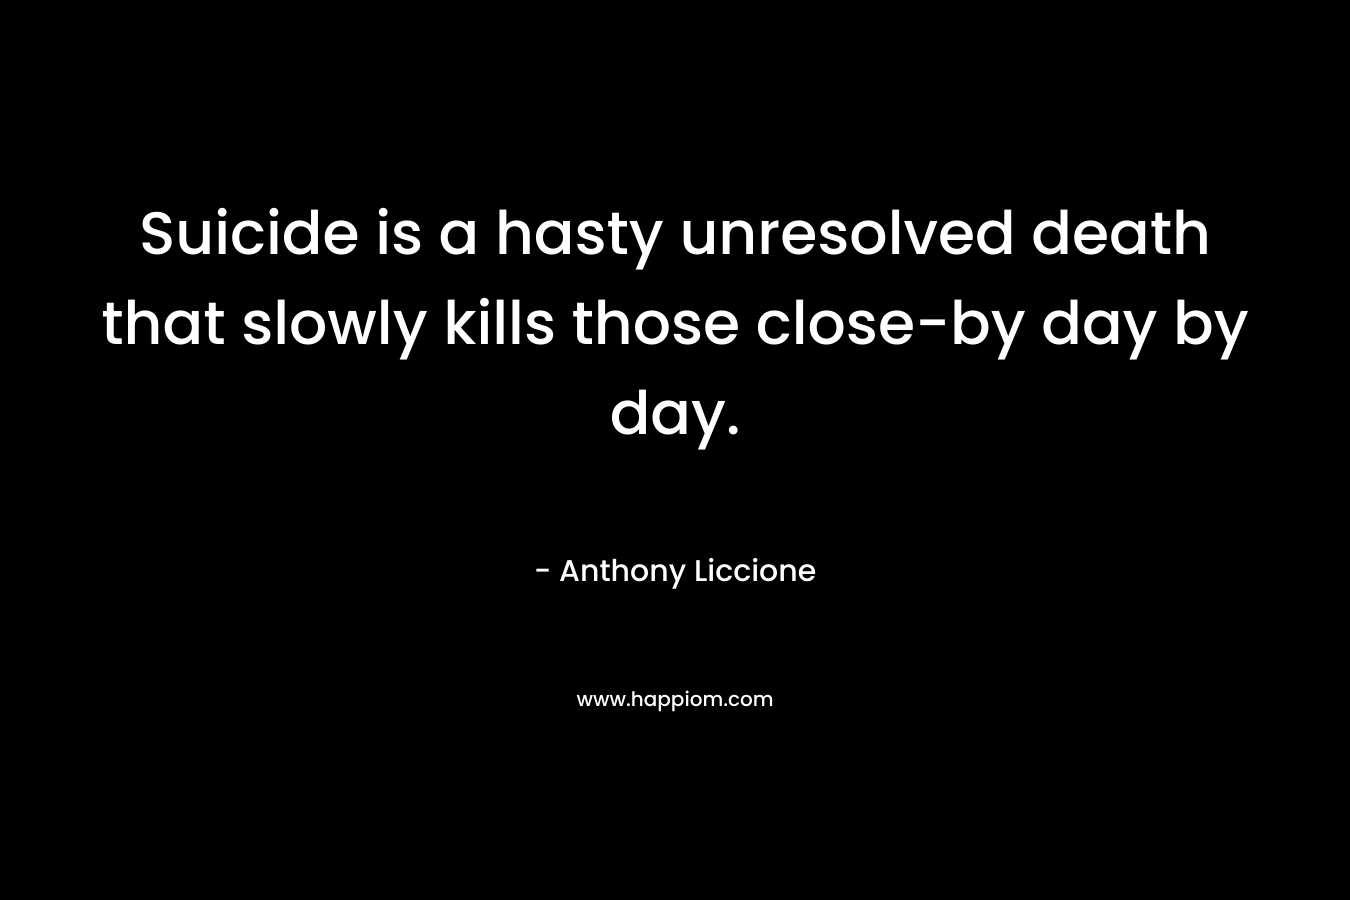 Suicide is a hasty unresolved death that slowly kills those close-by day by day. – Anthony Liccione